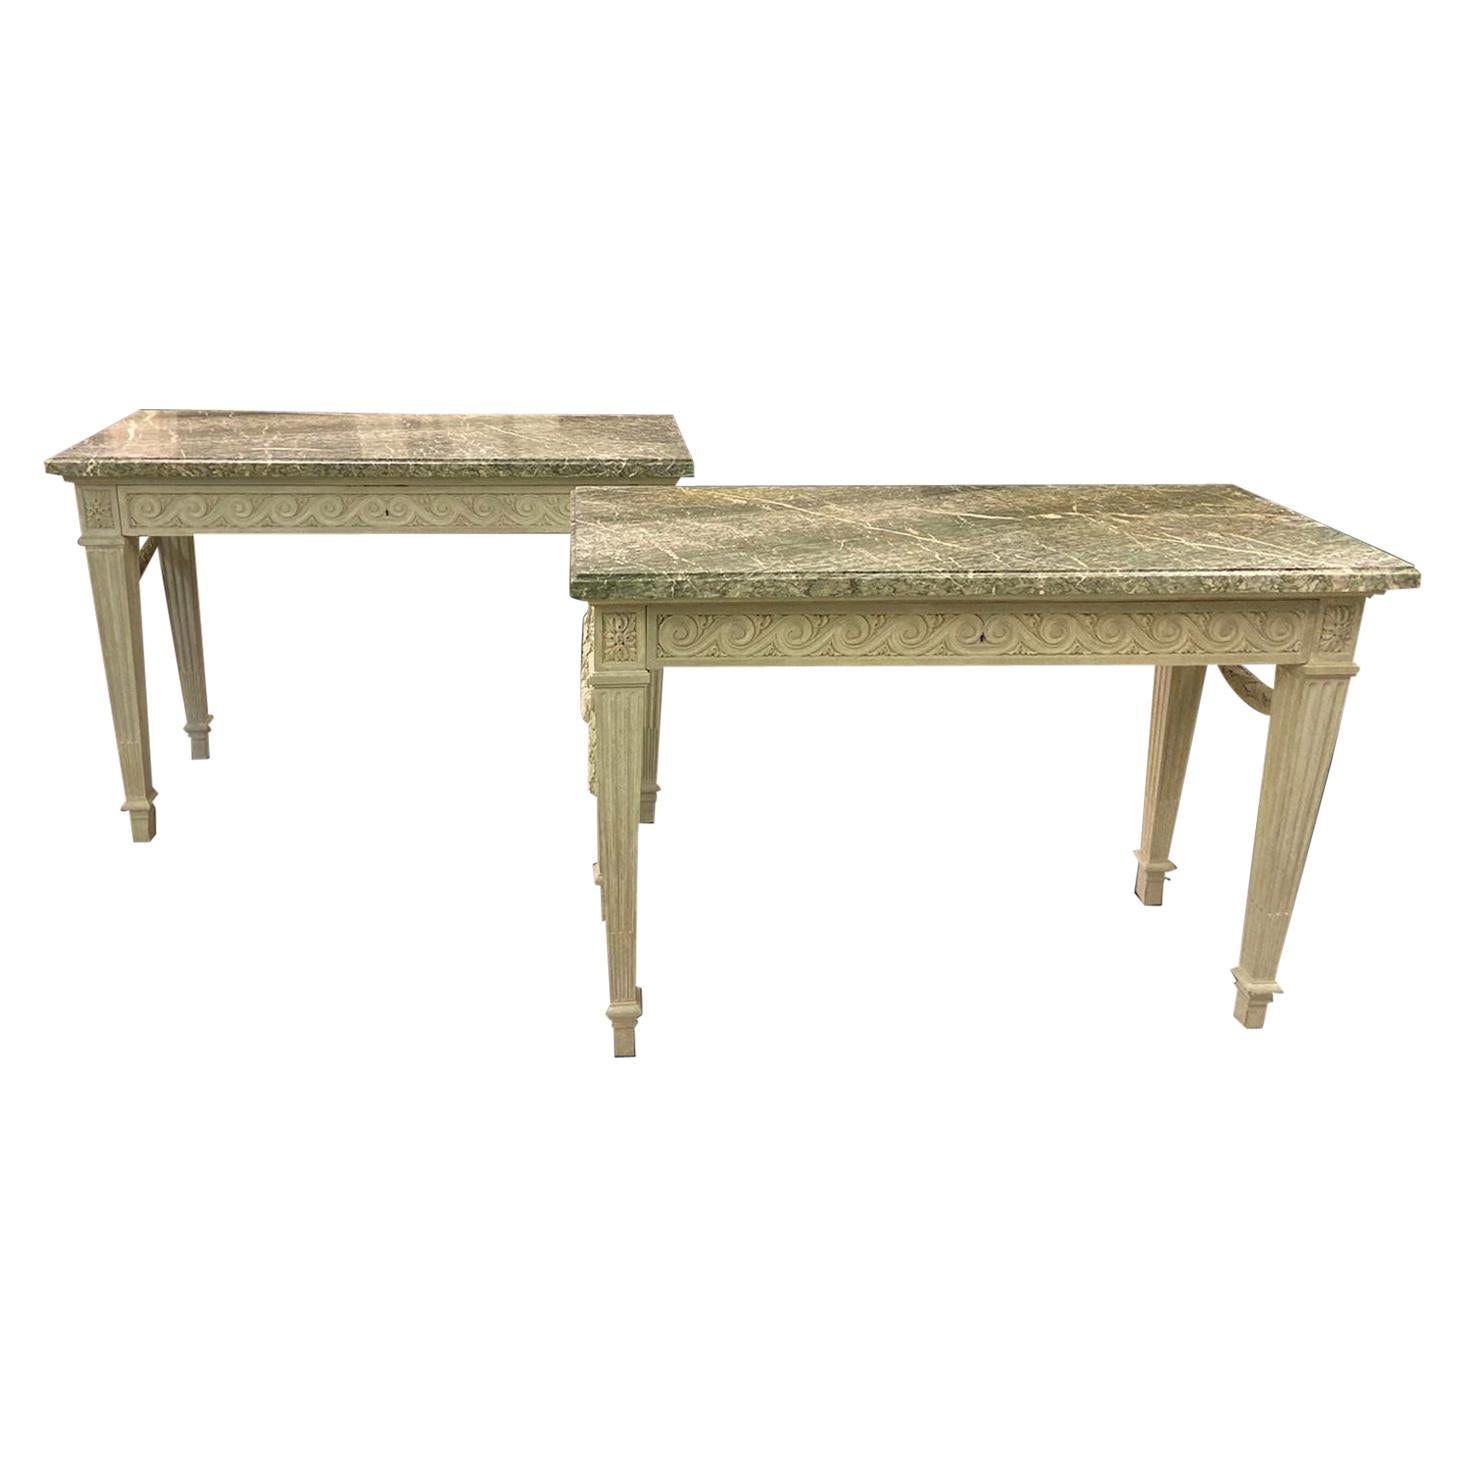 A pair of late 19th Century wooden Console Tables with Cipillino Marble tops